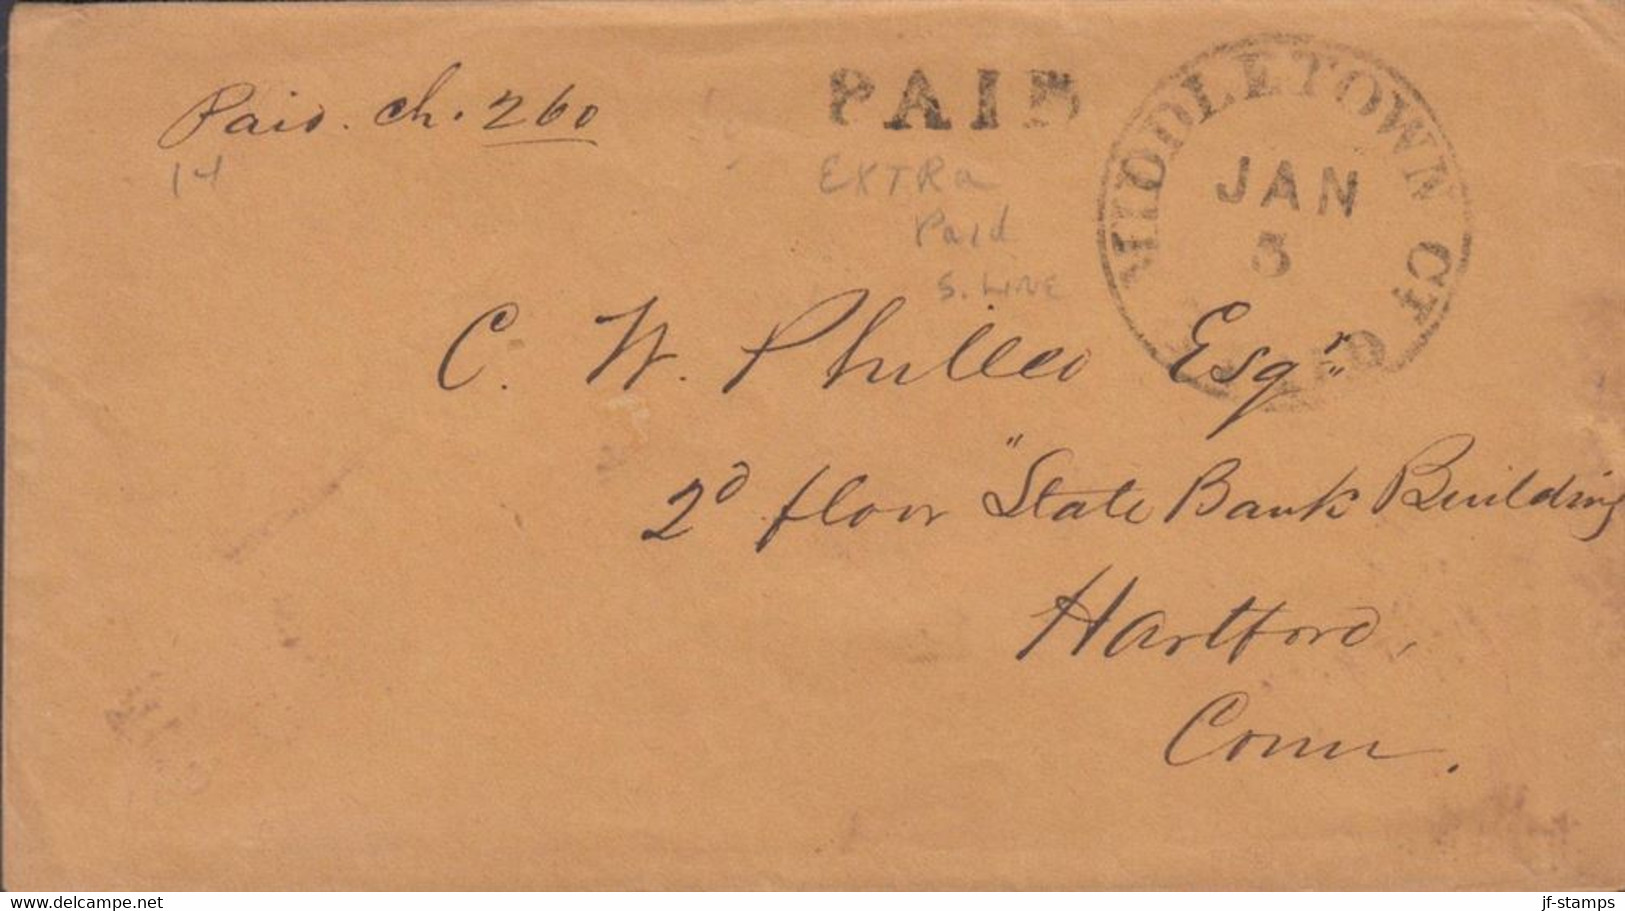 1840. USA. MIDDLETOWN CT JAN 5 PAID + PAID On Small Cover To Hartford, Conn. Manuscript Paid Ch 260. Inter... - JF428322 - …-1845 Voorfilatelie